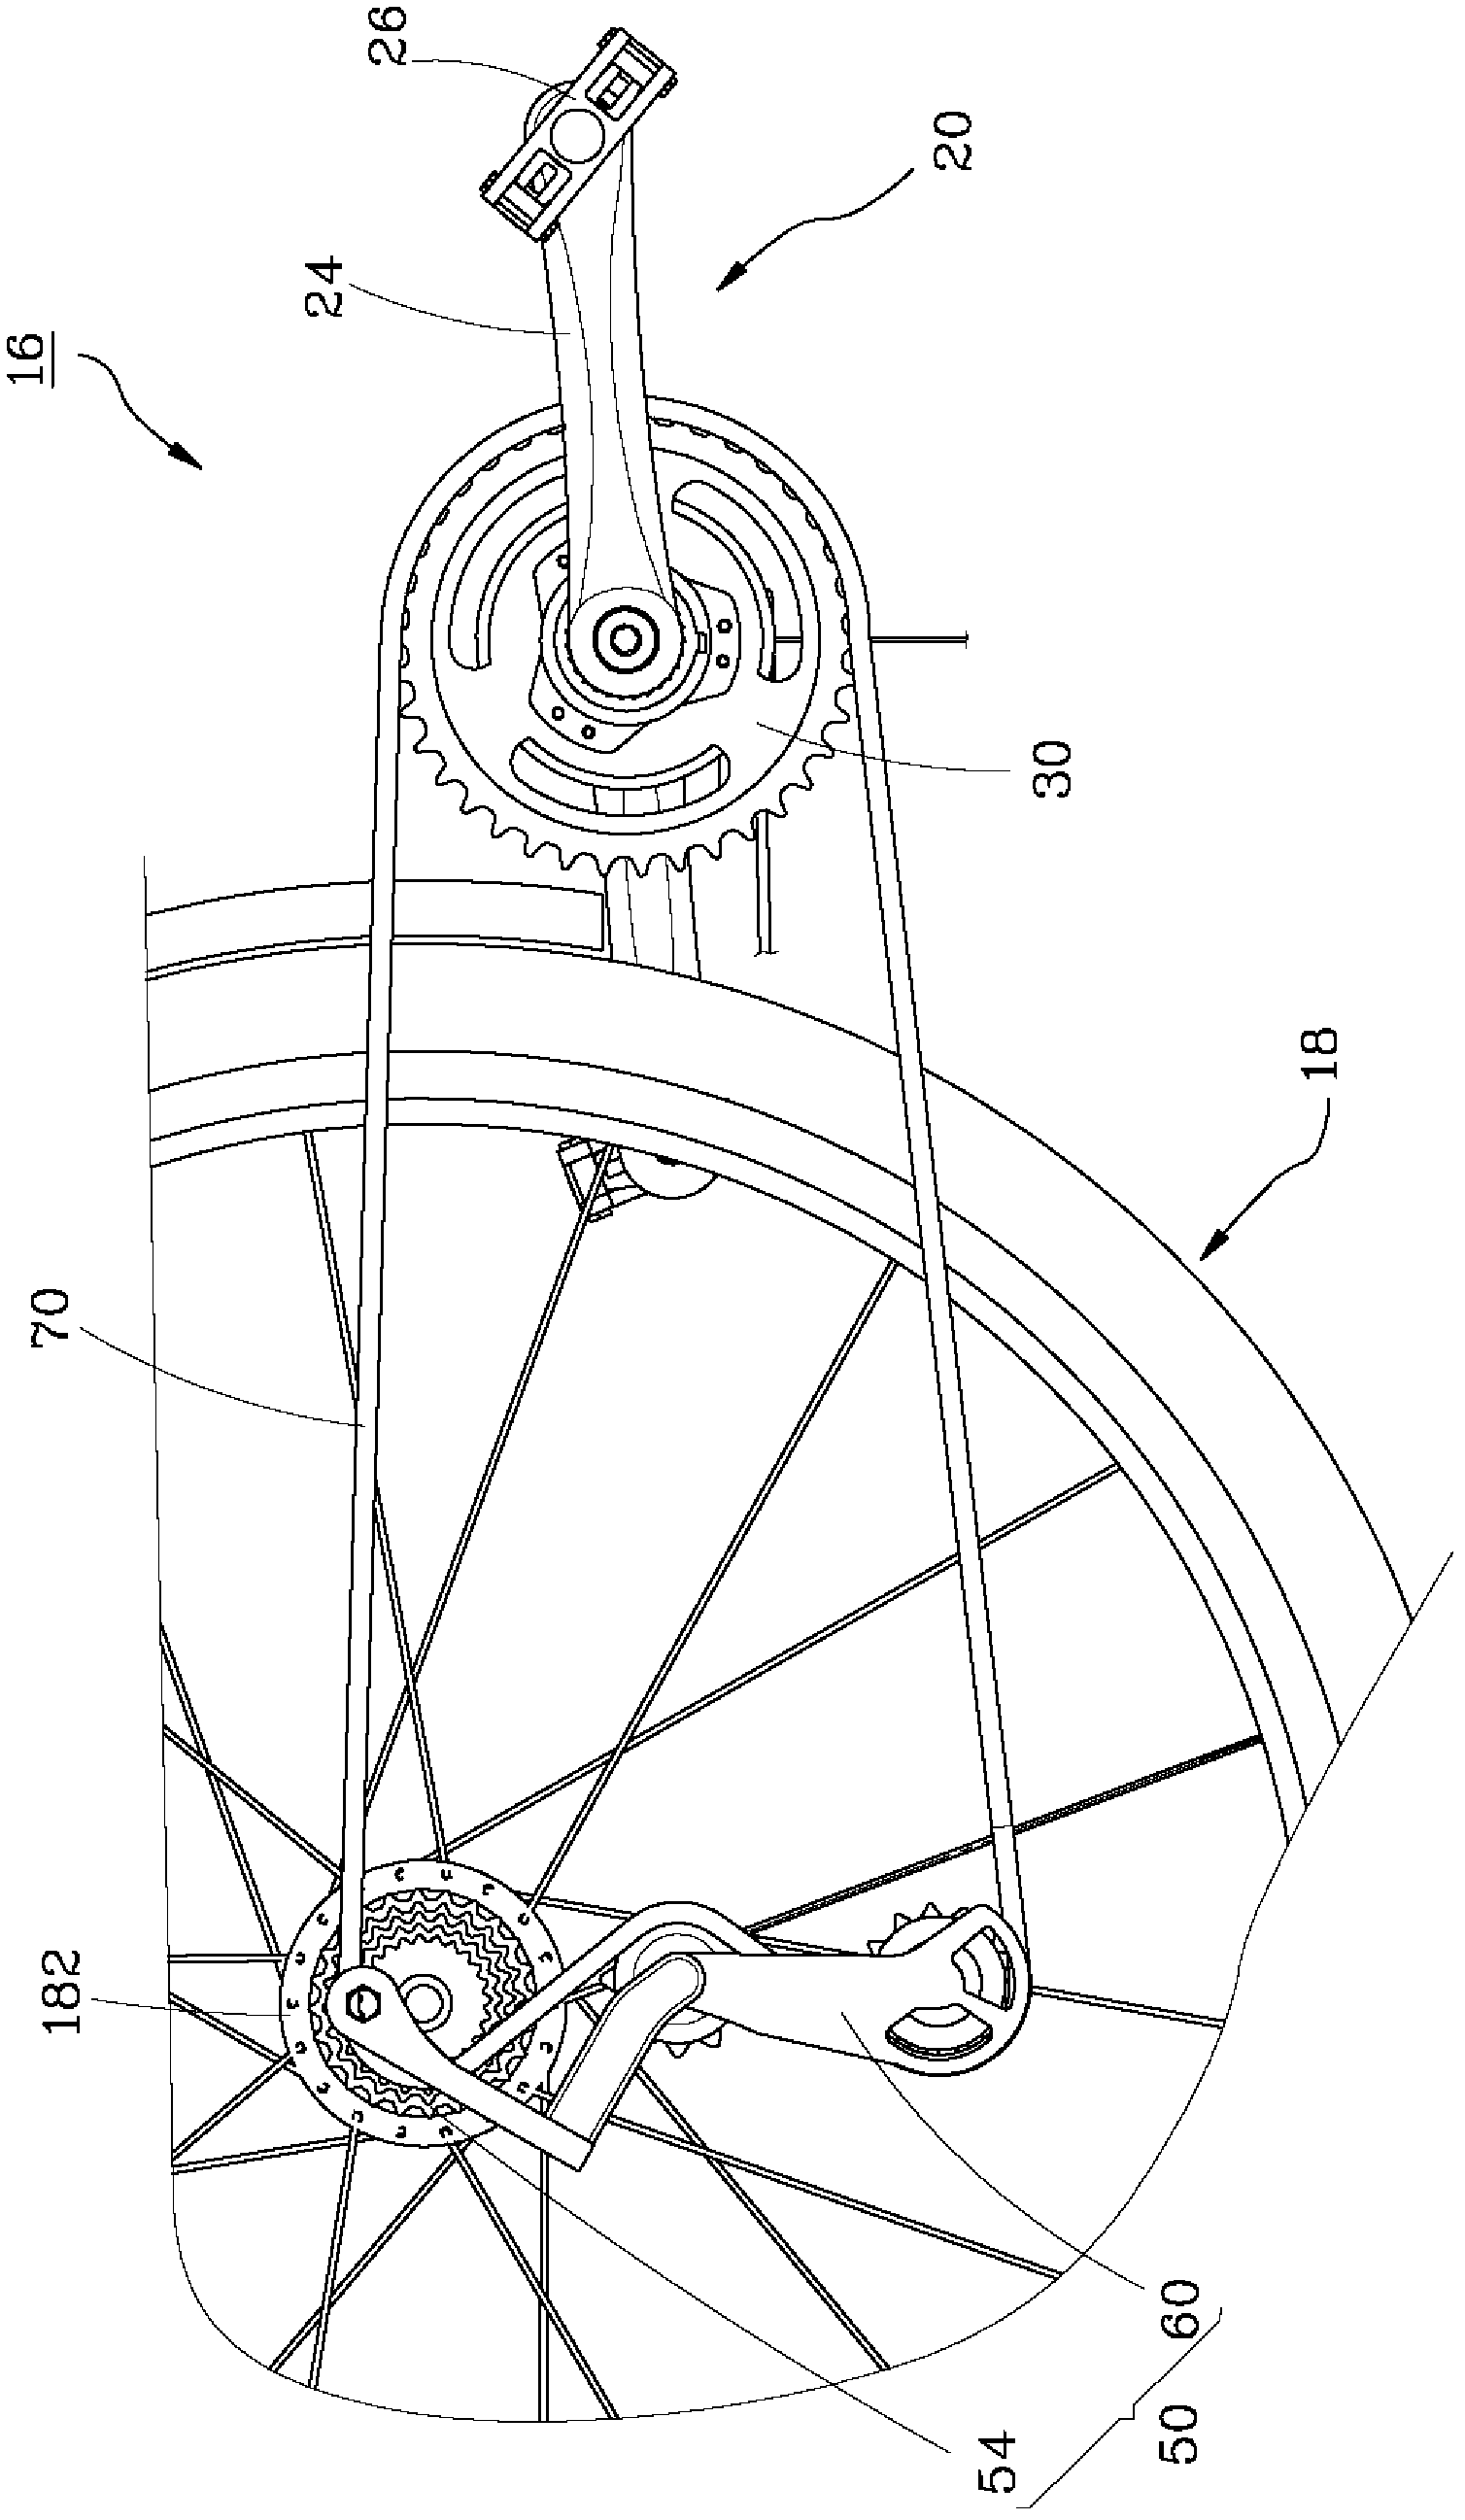 Outer speed change mechanism of electric bicycle